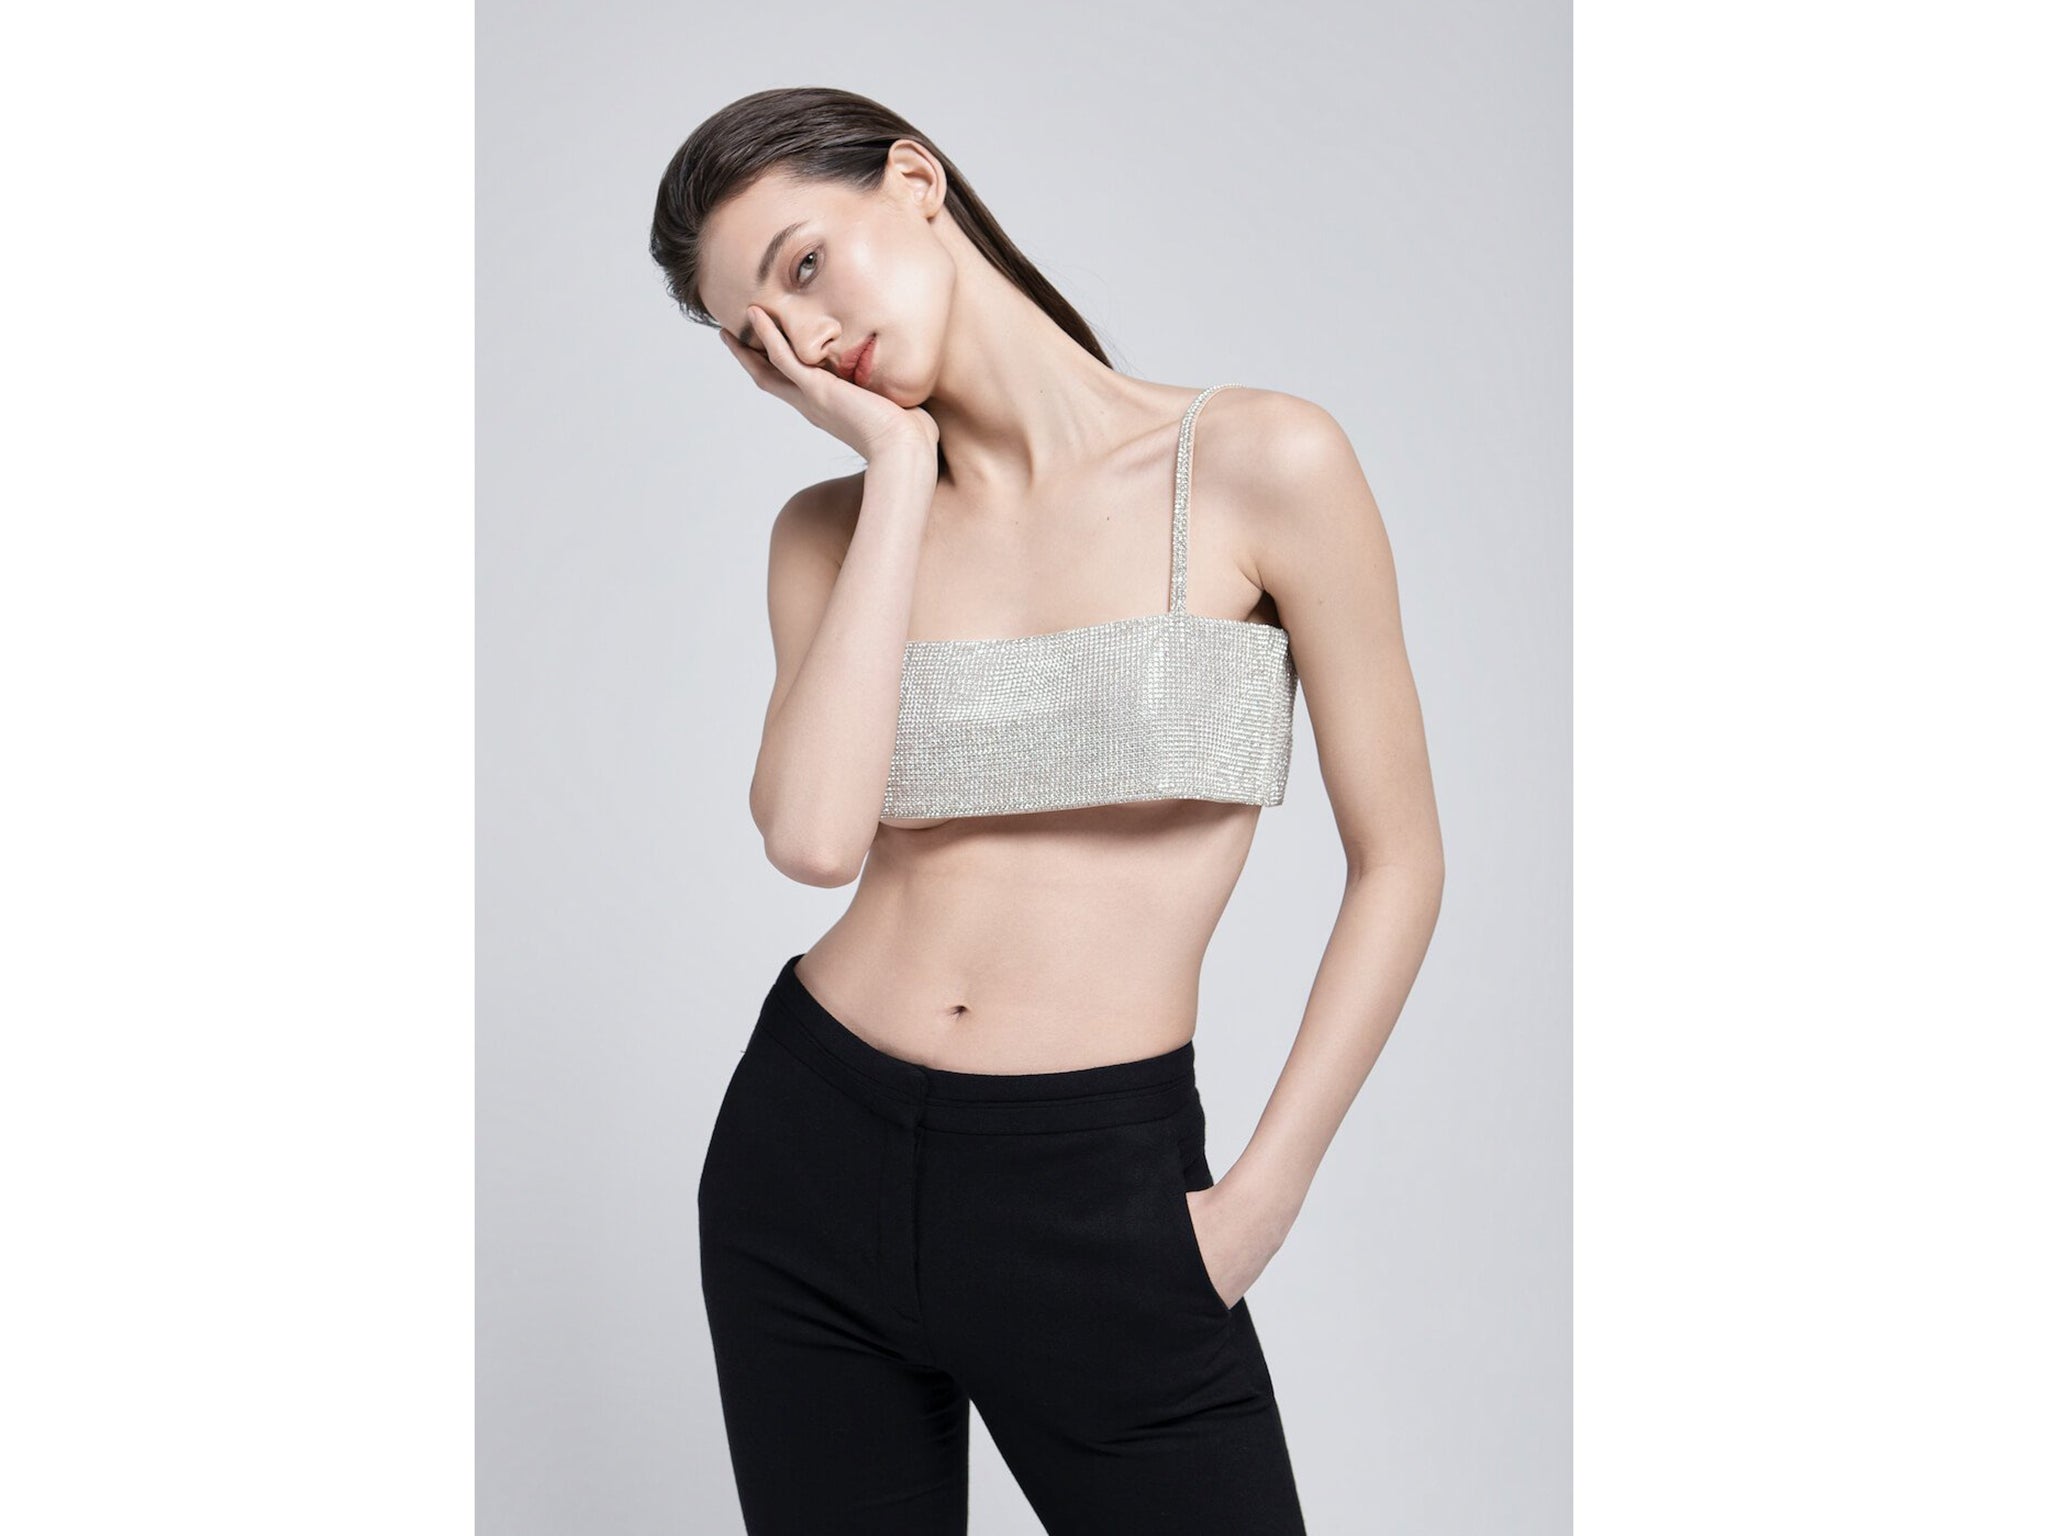 Zara's sell-out sequin crop top: Dupes for the bralette